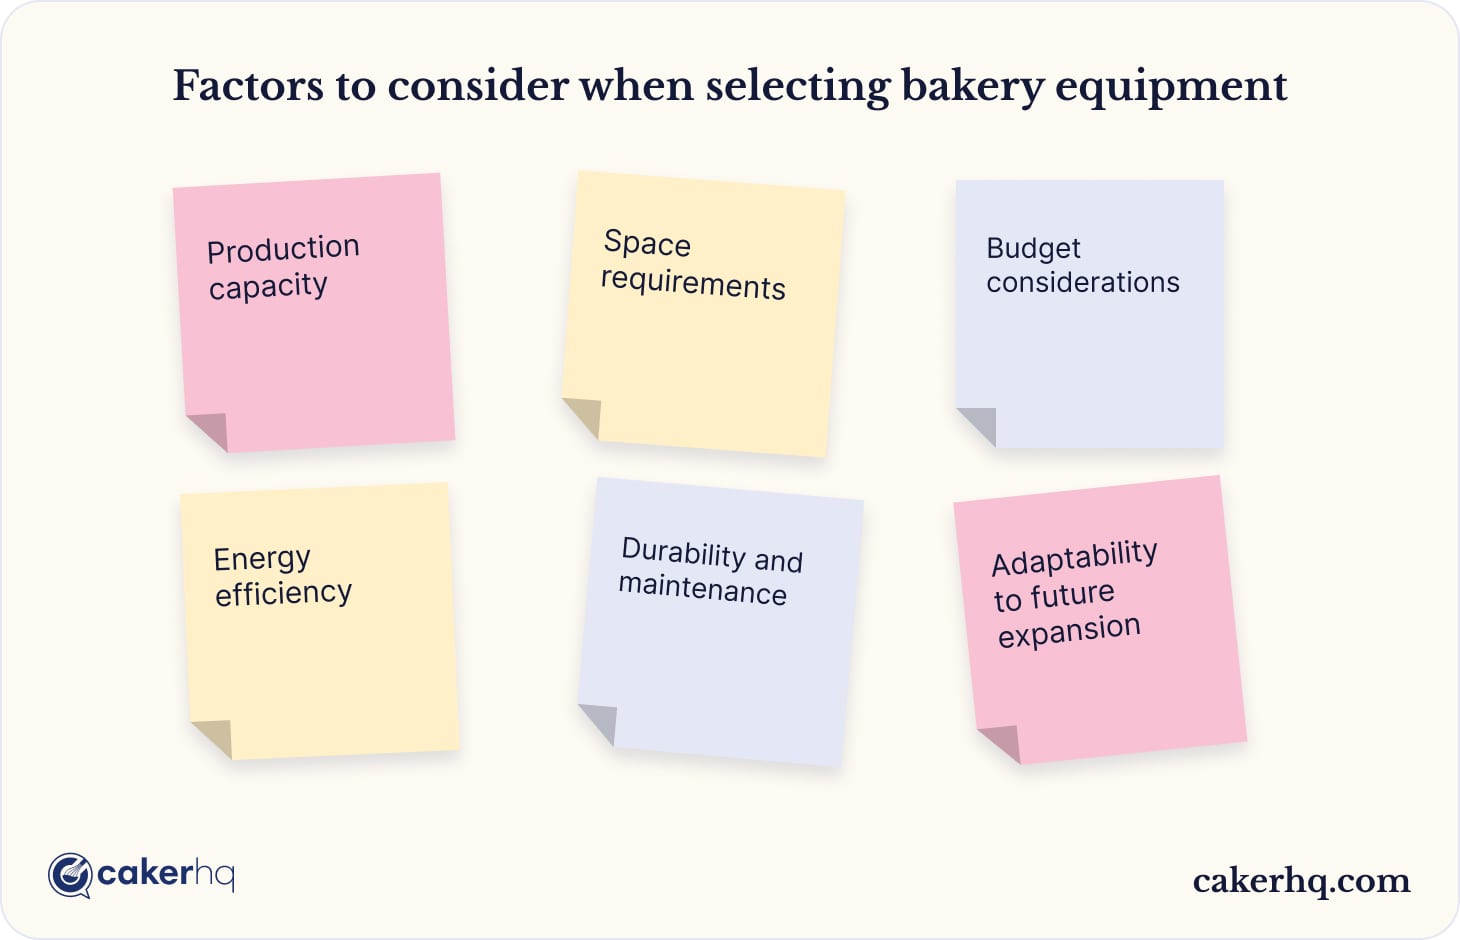 Factors to consider when selecting bakery equipment